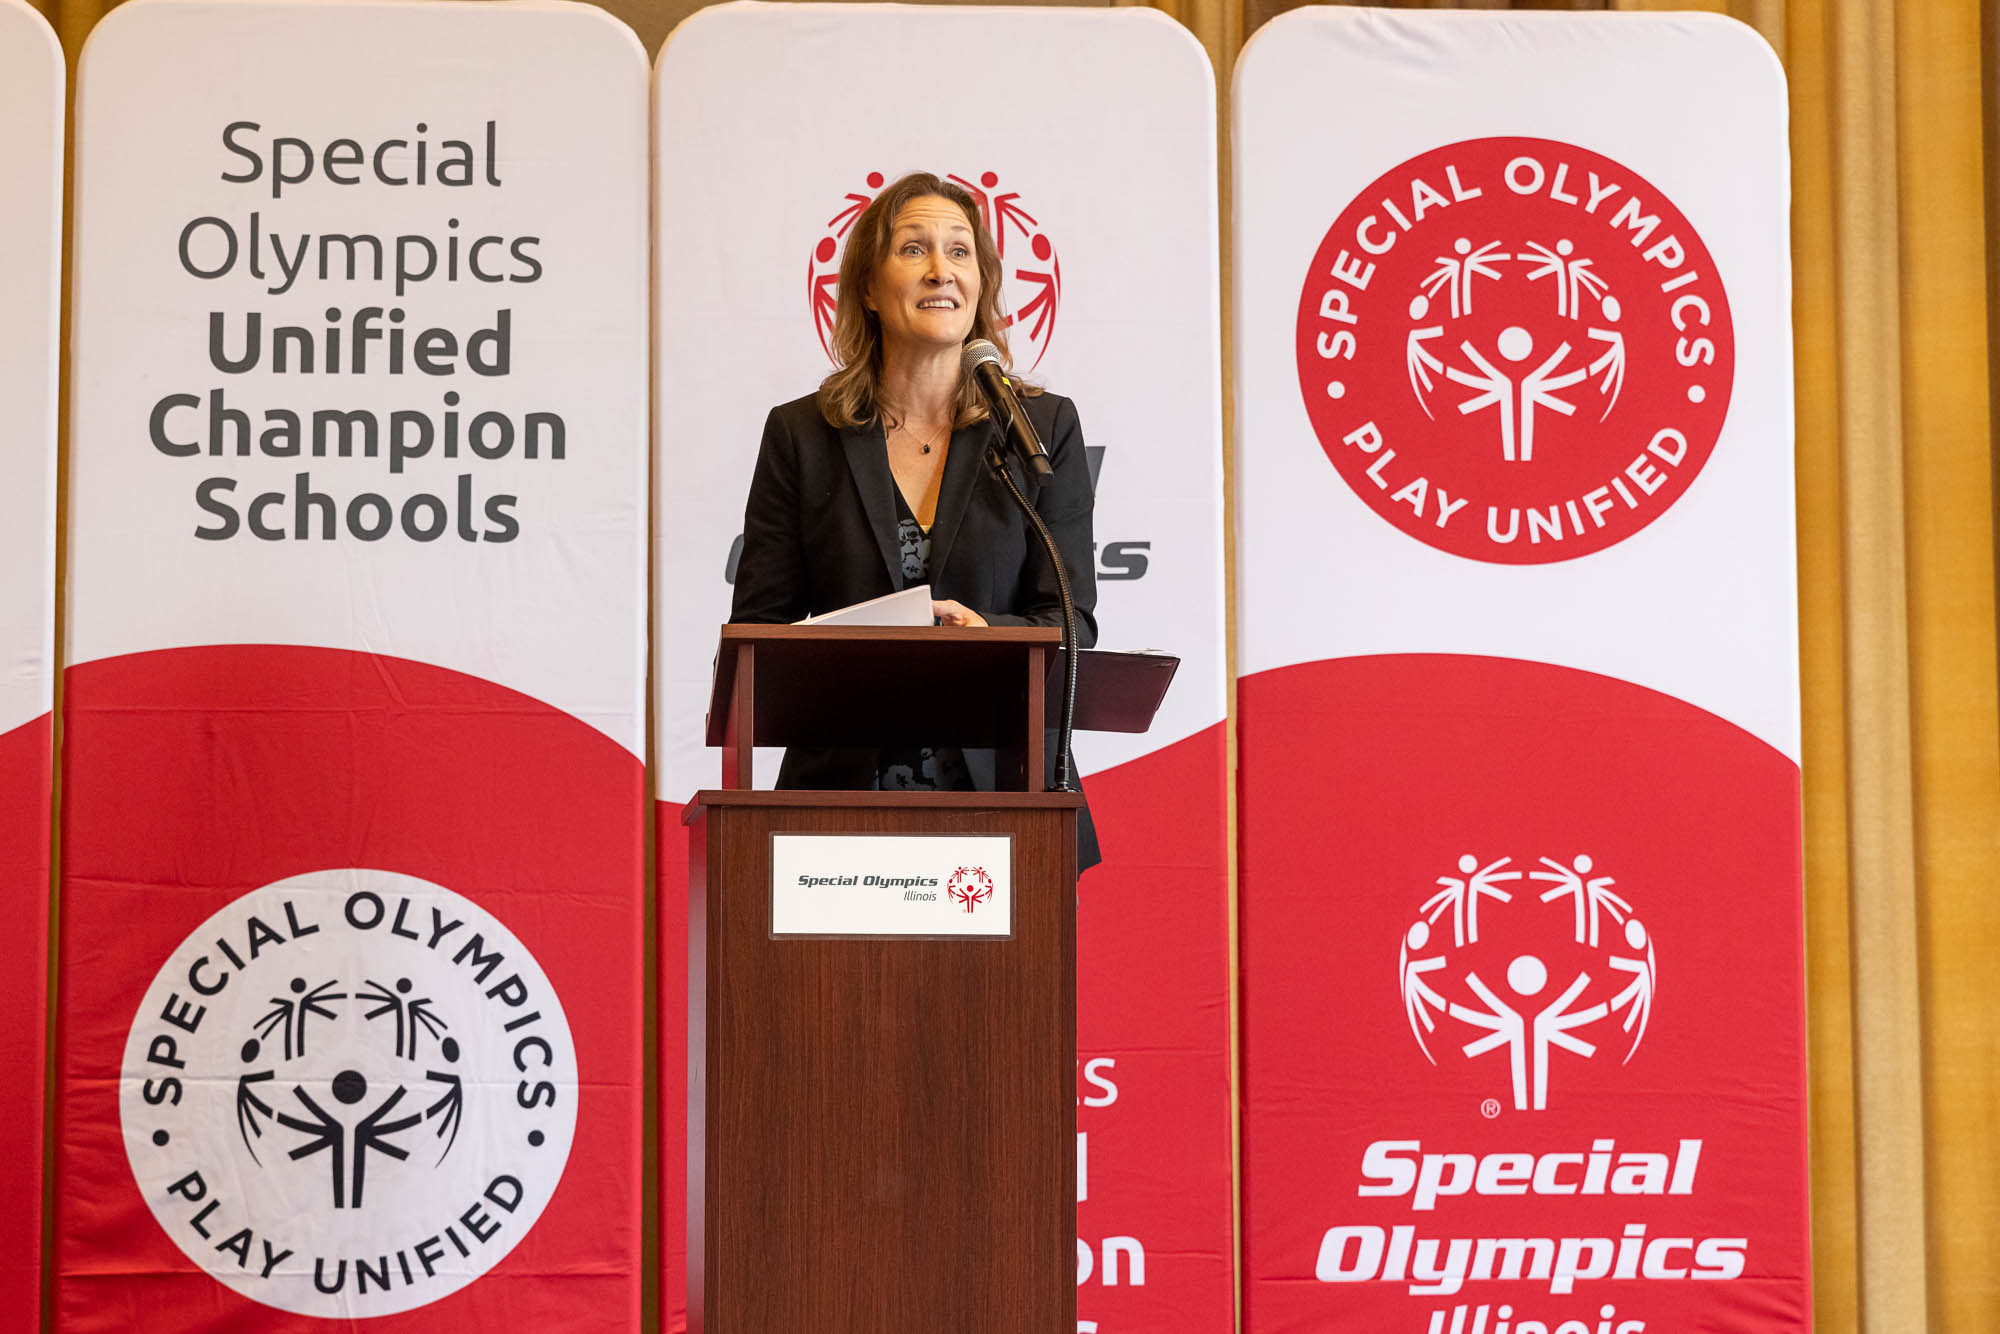 A photo of Rebecca Clark, Anixter's CEO, on a podium in front of a sign that says Special Olympics Unified Champion Schools.